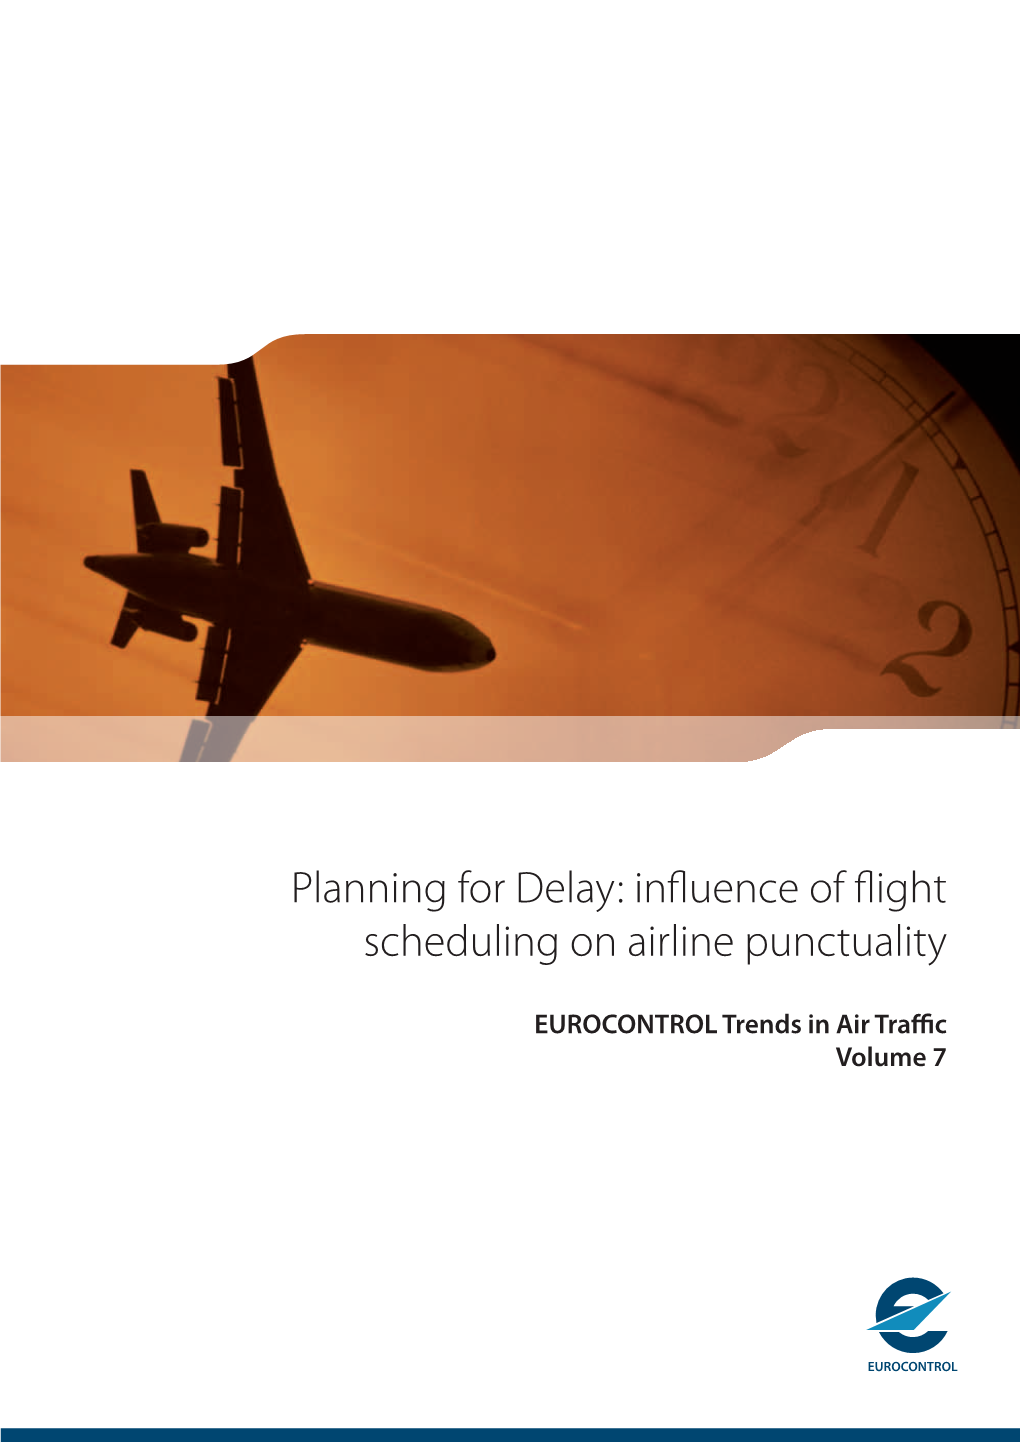 Planning for Delay: Influence of Flight Scheduling on Airline Punctuality